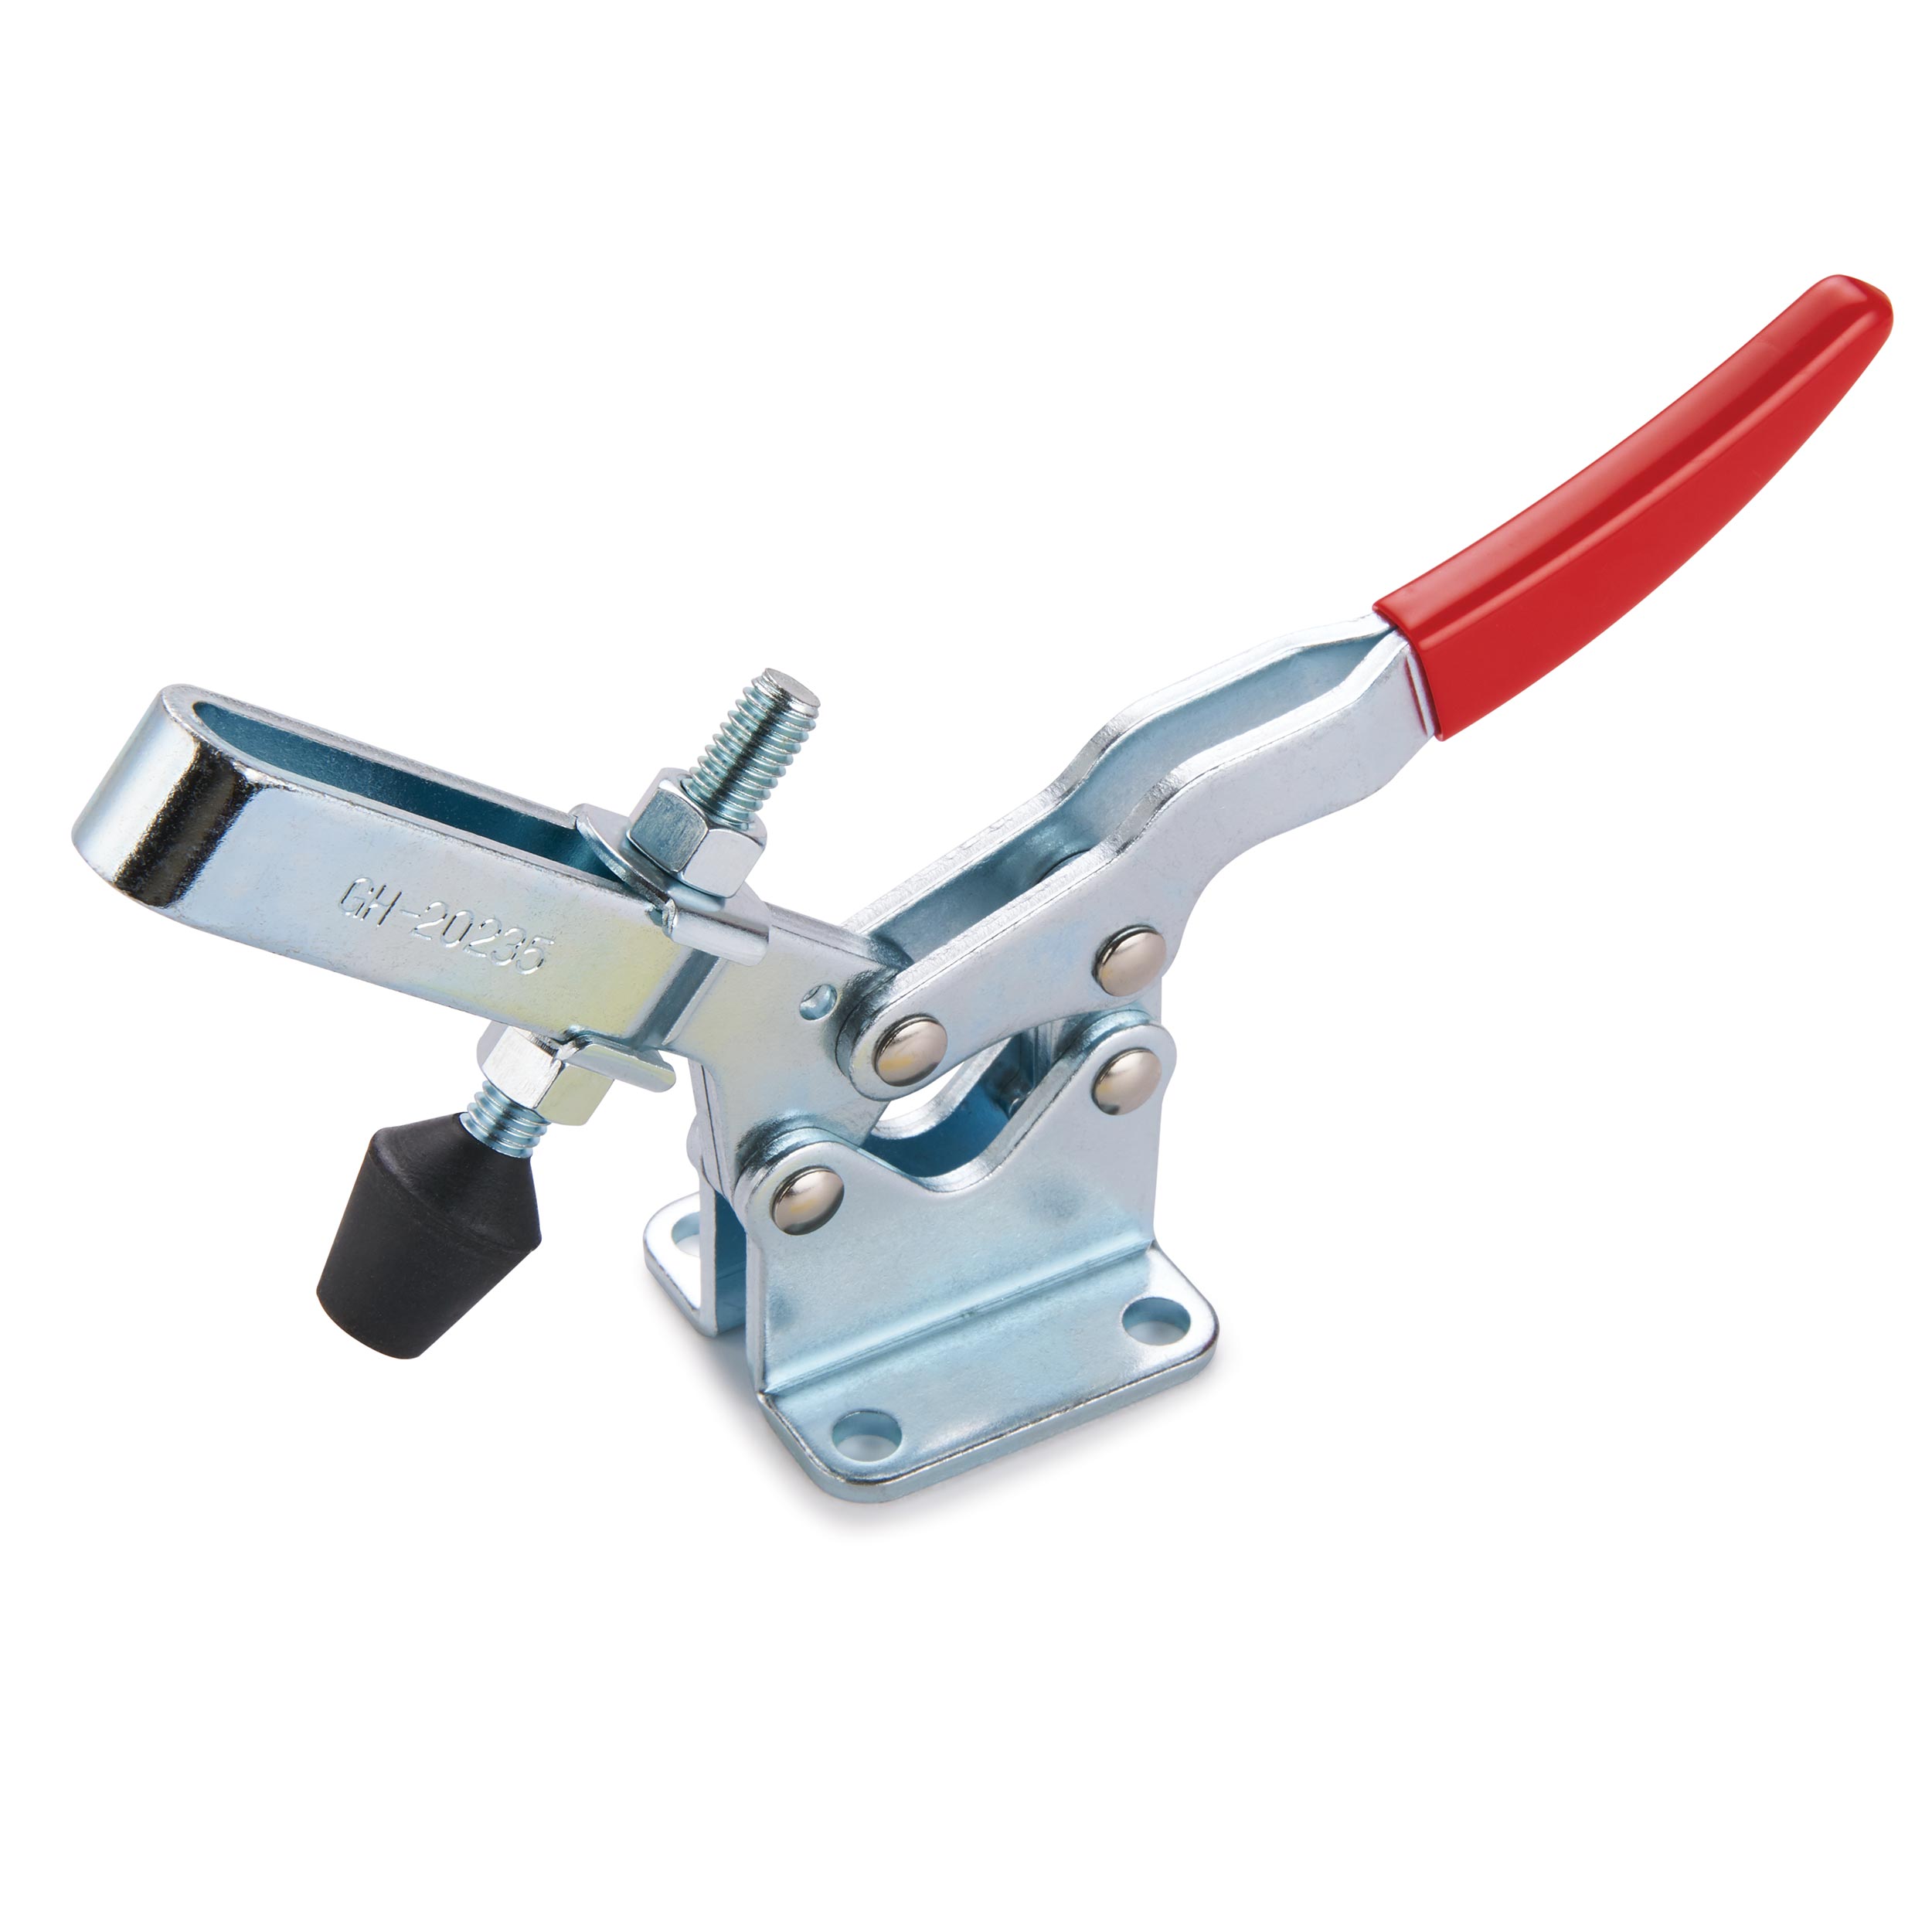 Low Silhouette Toggle Clamp, 11-3/4" X 2-1/2", 750 Lb. Capacity